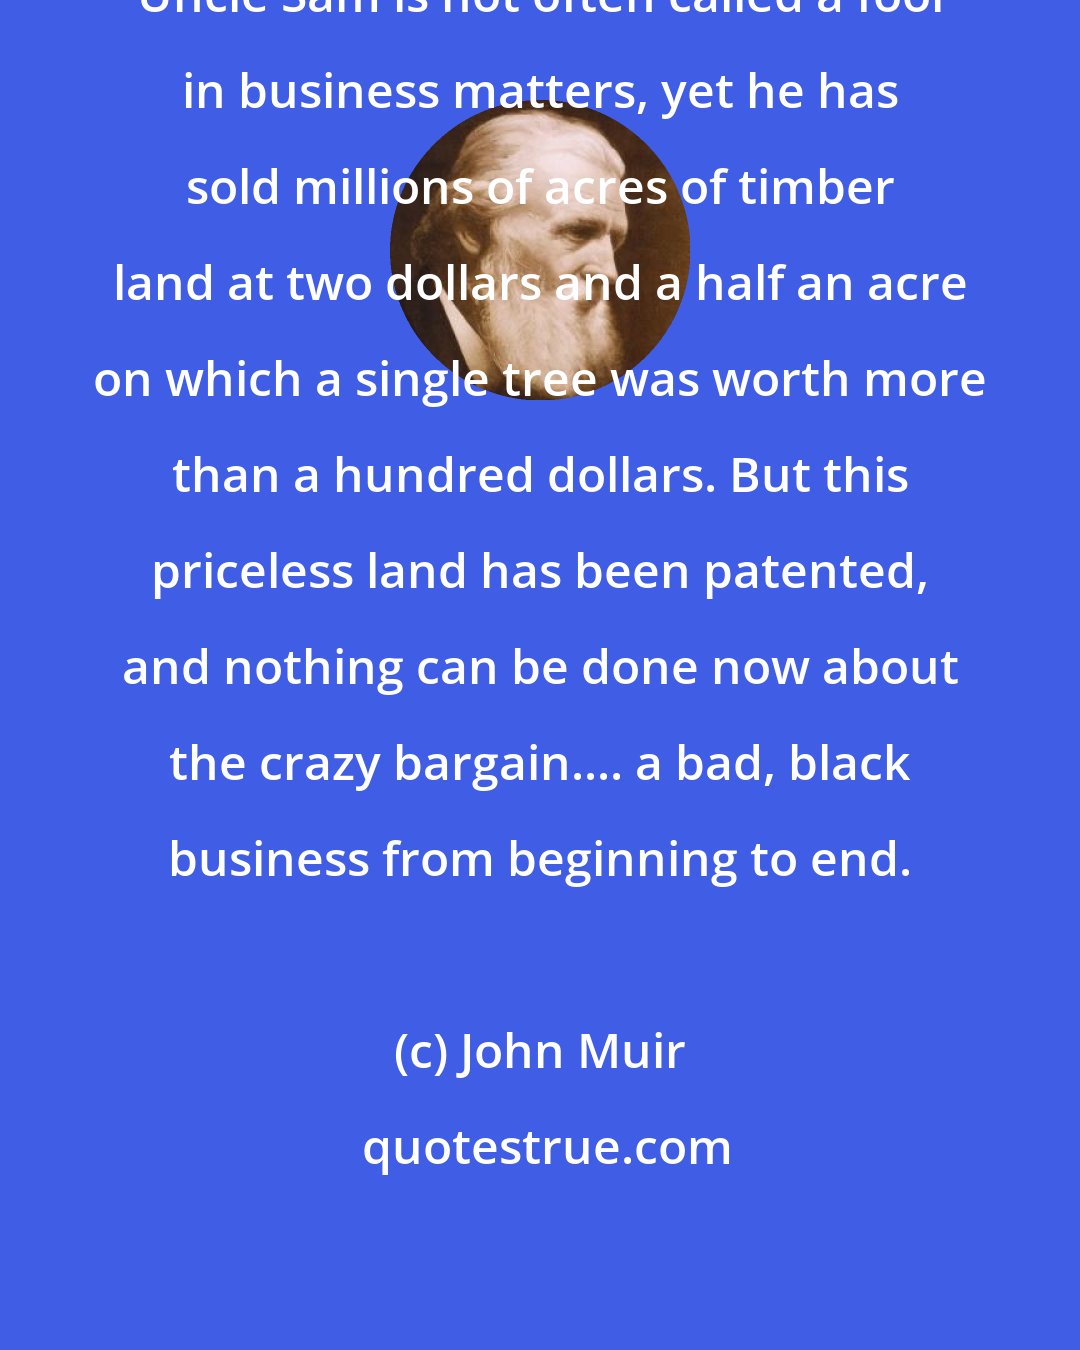 John Muir: Uncle Sam is not often called a fool in business matters, yet he has sold millions of acres of timber land at two dollars and a half an acre on which a single tree was worth more than a hundred dollars. But this priceless land has been patented, and nothing can be done now about the crazy bargain.... a bad, black business from beginning to end.